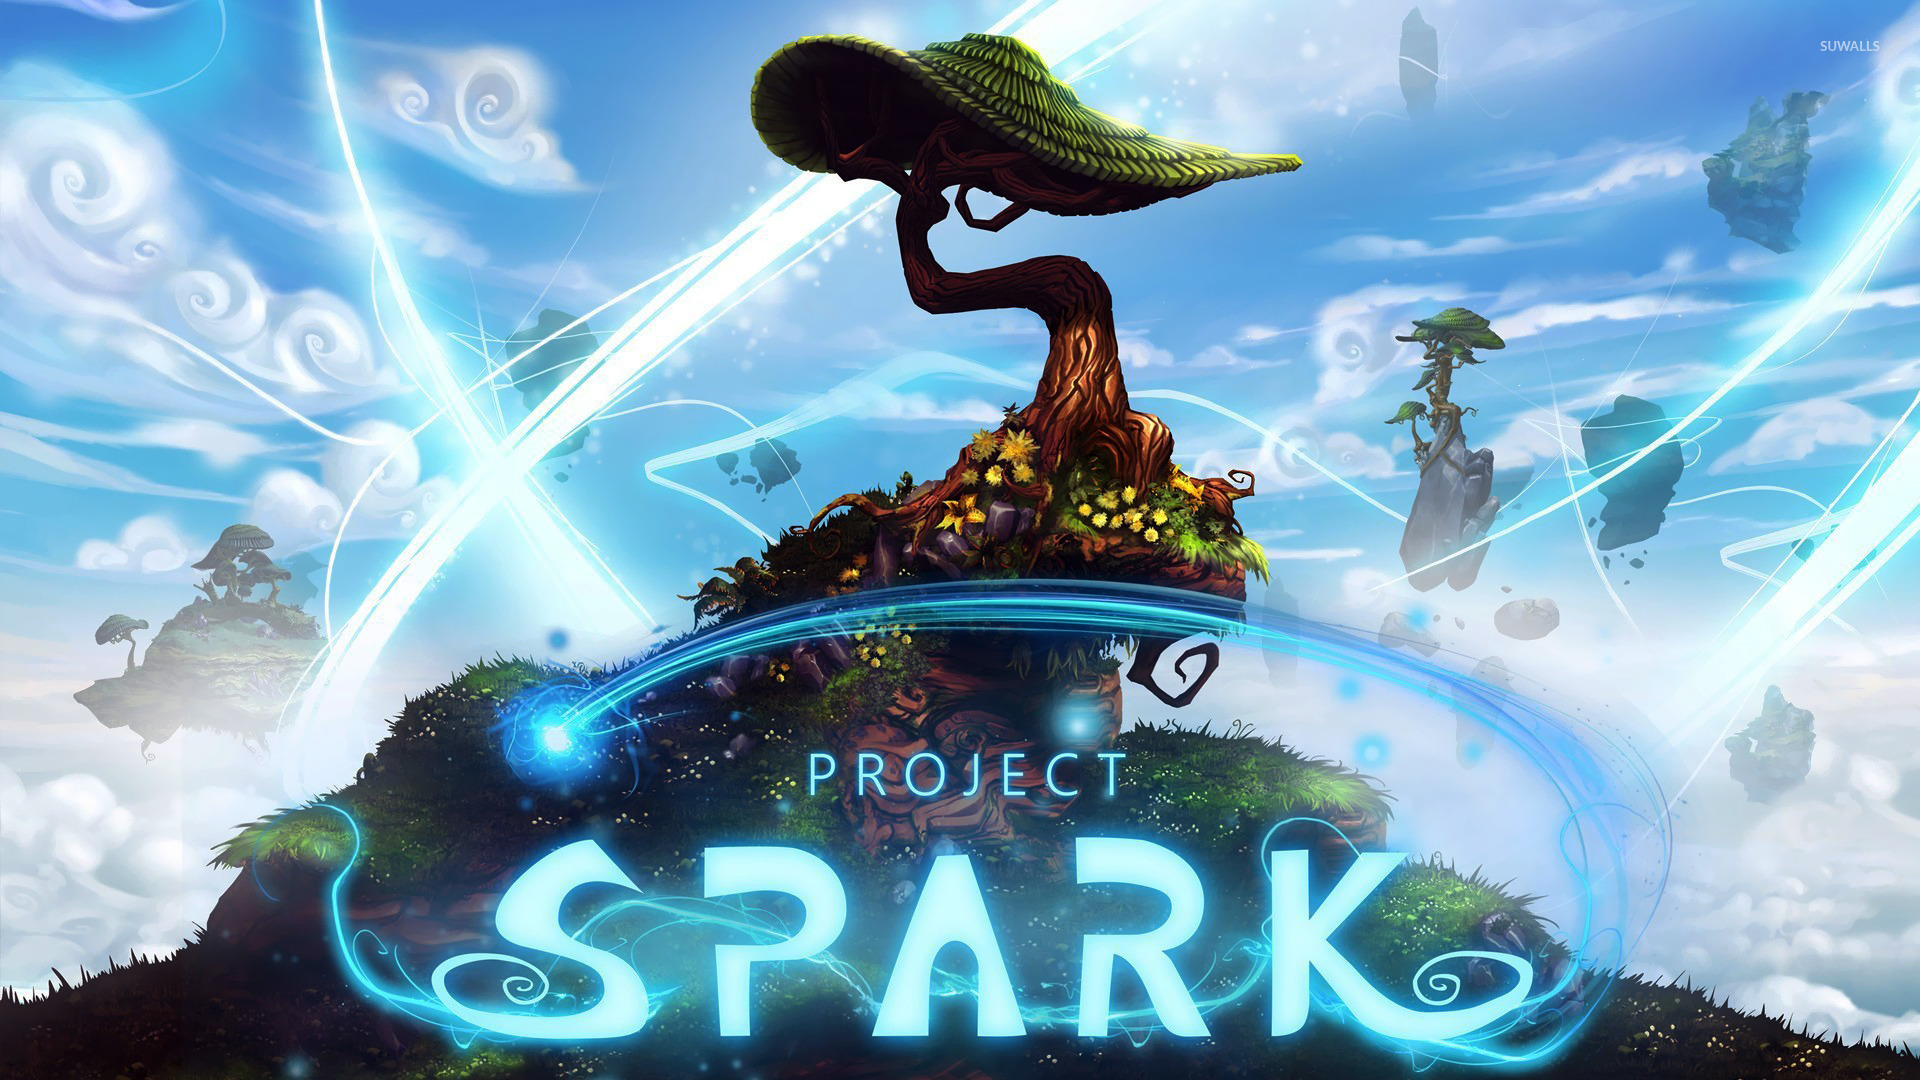 Project Spark wallpaper   Game wallpapers   21690